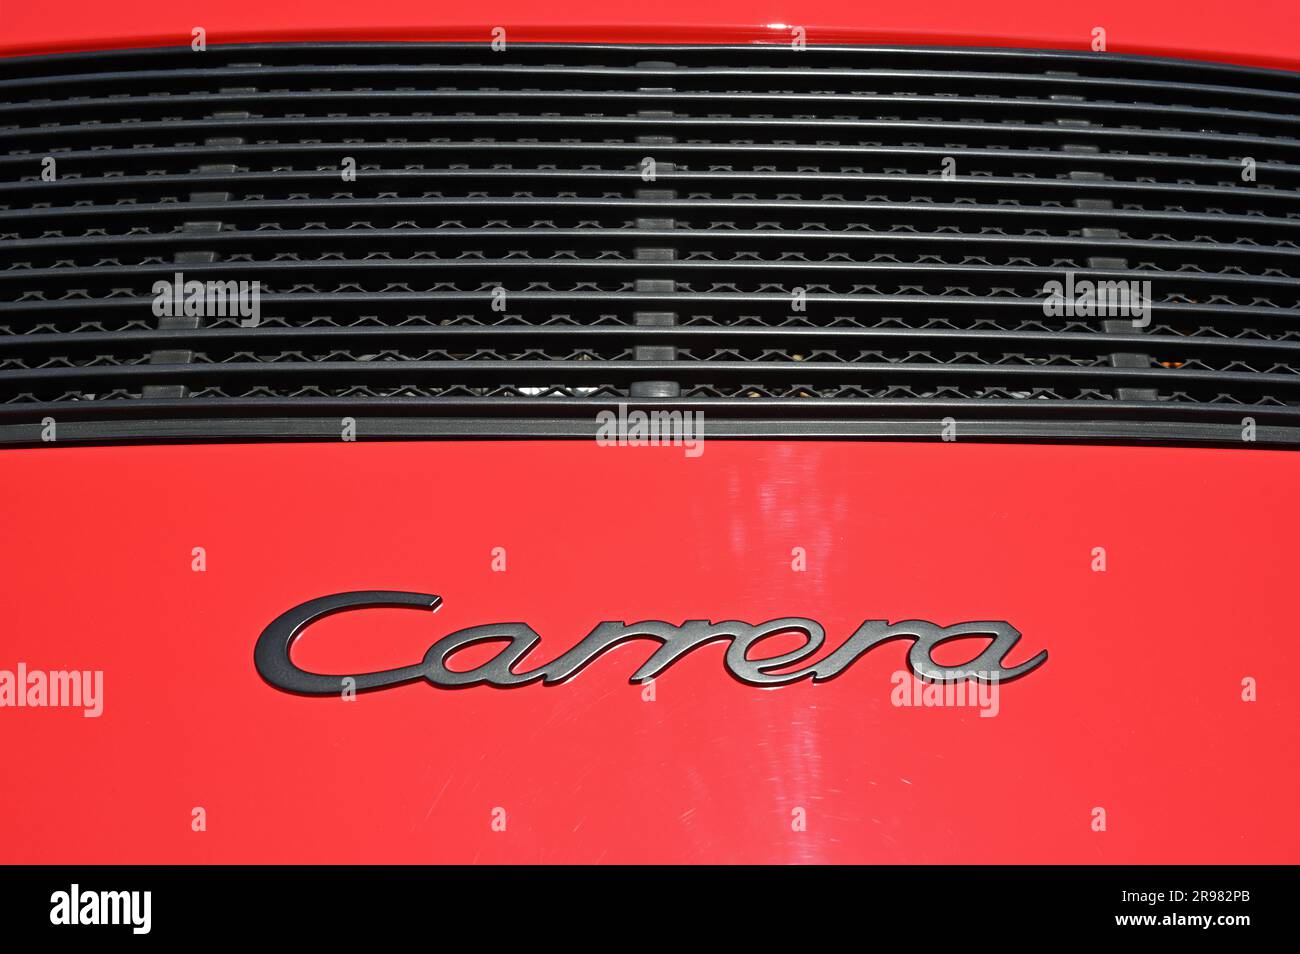 The lettering 'Carrera' on a red car Stock Photo